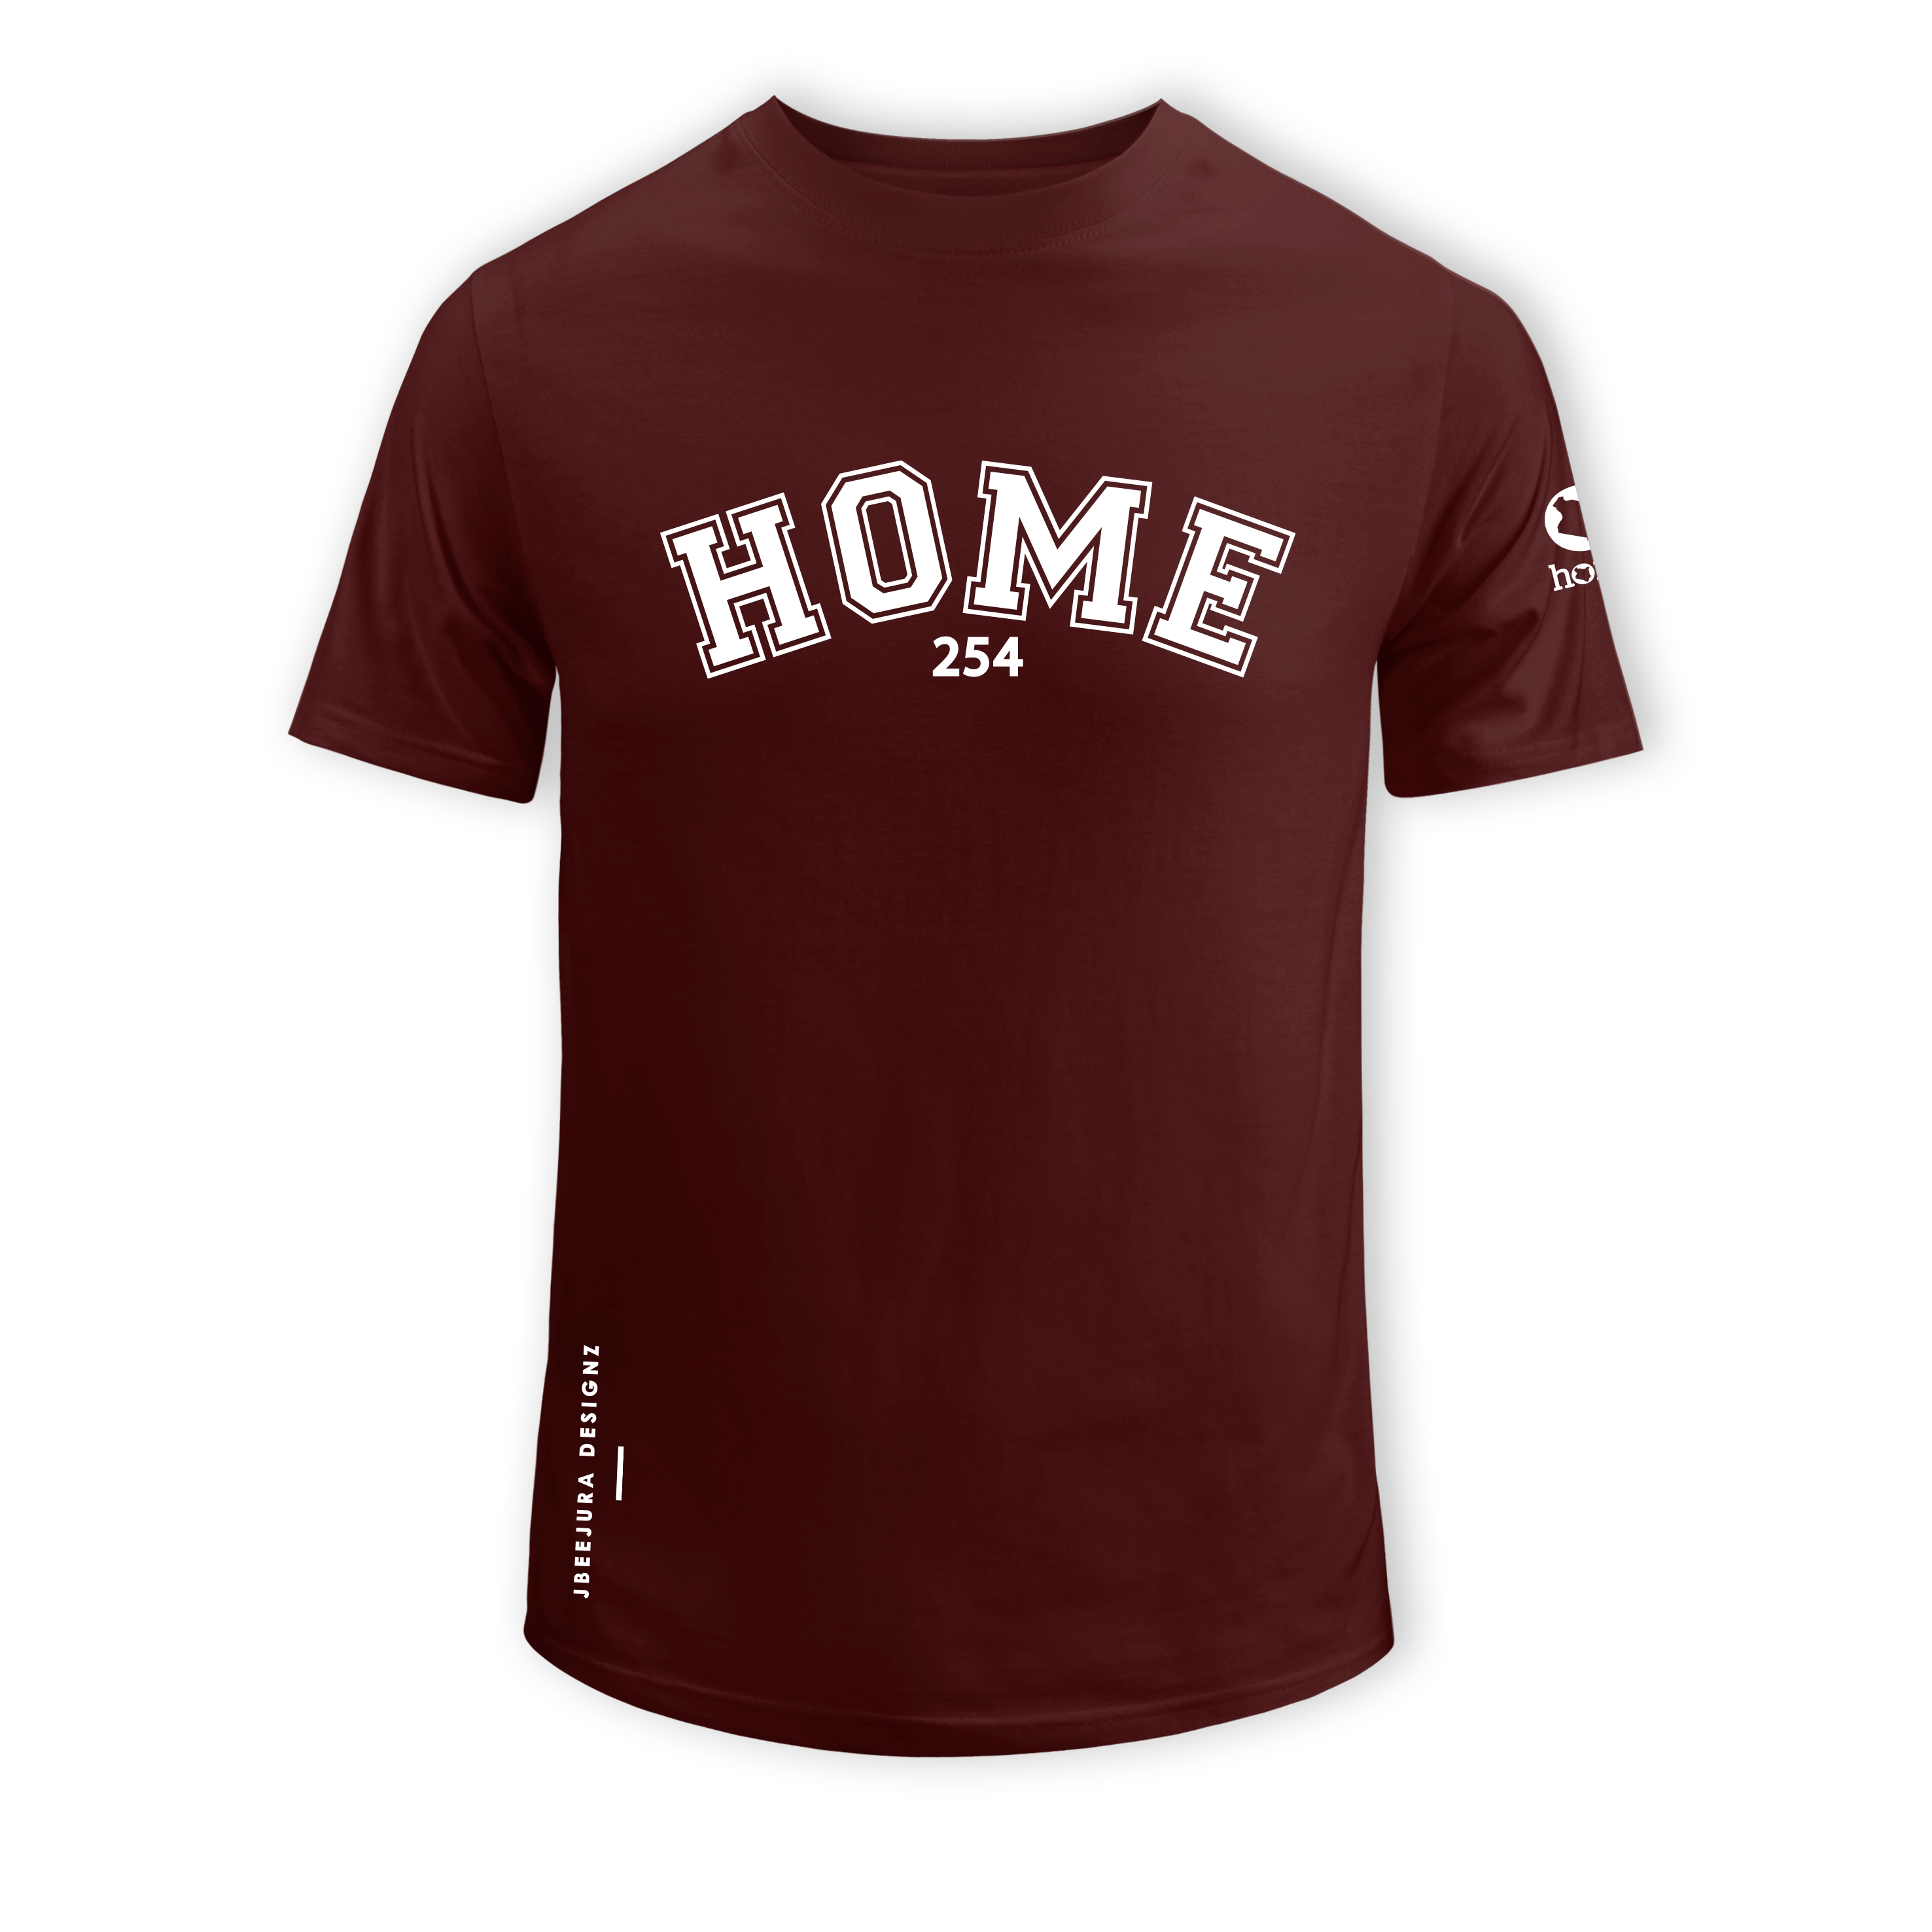 : home_254 SHORT-SLEEVED MAROON T-SHIRT WITH A WHITE COLLEGE PRINT – COTTON PLUS FABRIC